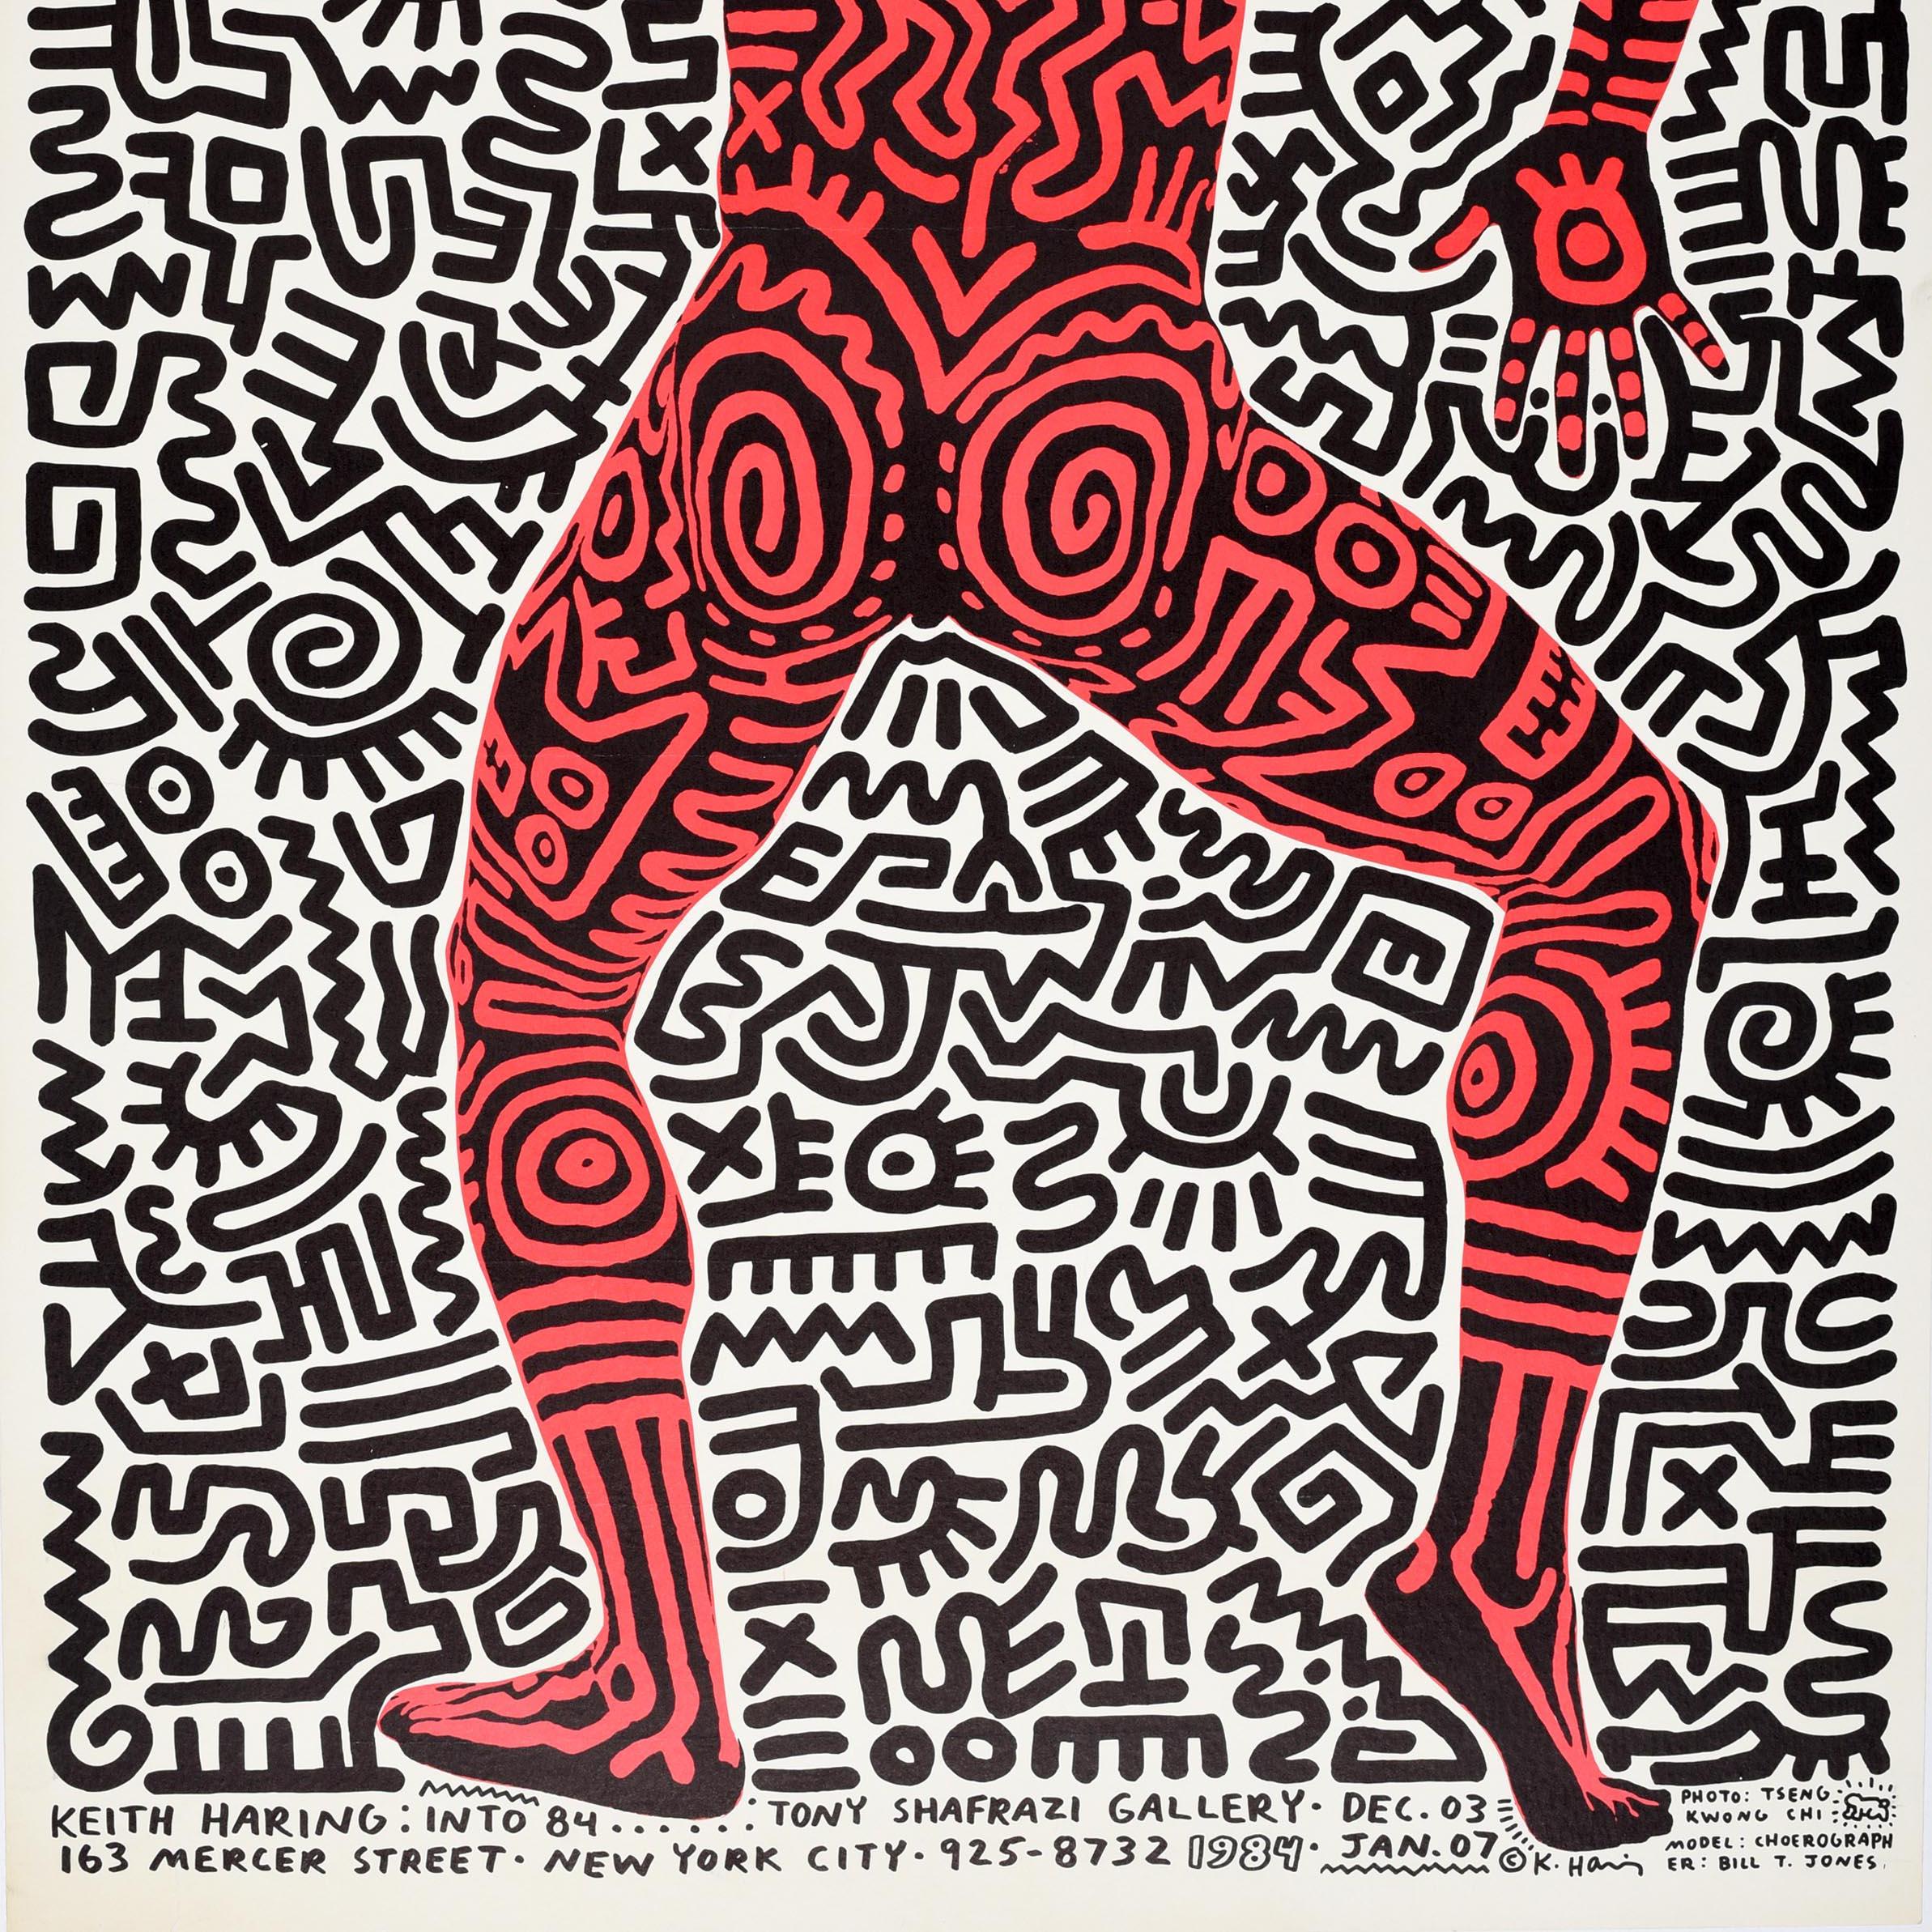 Original vintage advertising poster for a Keith Haring exhibition - Into 84 - held at the Tony Shafrazi Gallery in New York City from 3 December to 7 January. Great design by the American artist and social activist Keith Haring (1958-1990) featuring